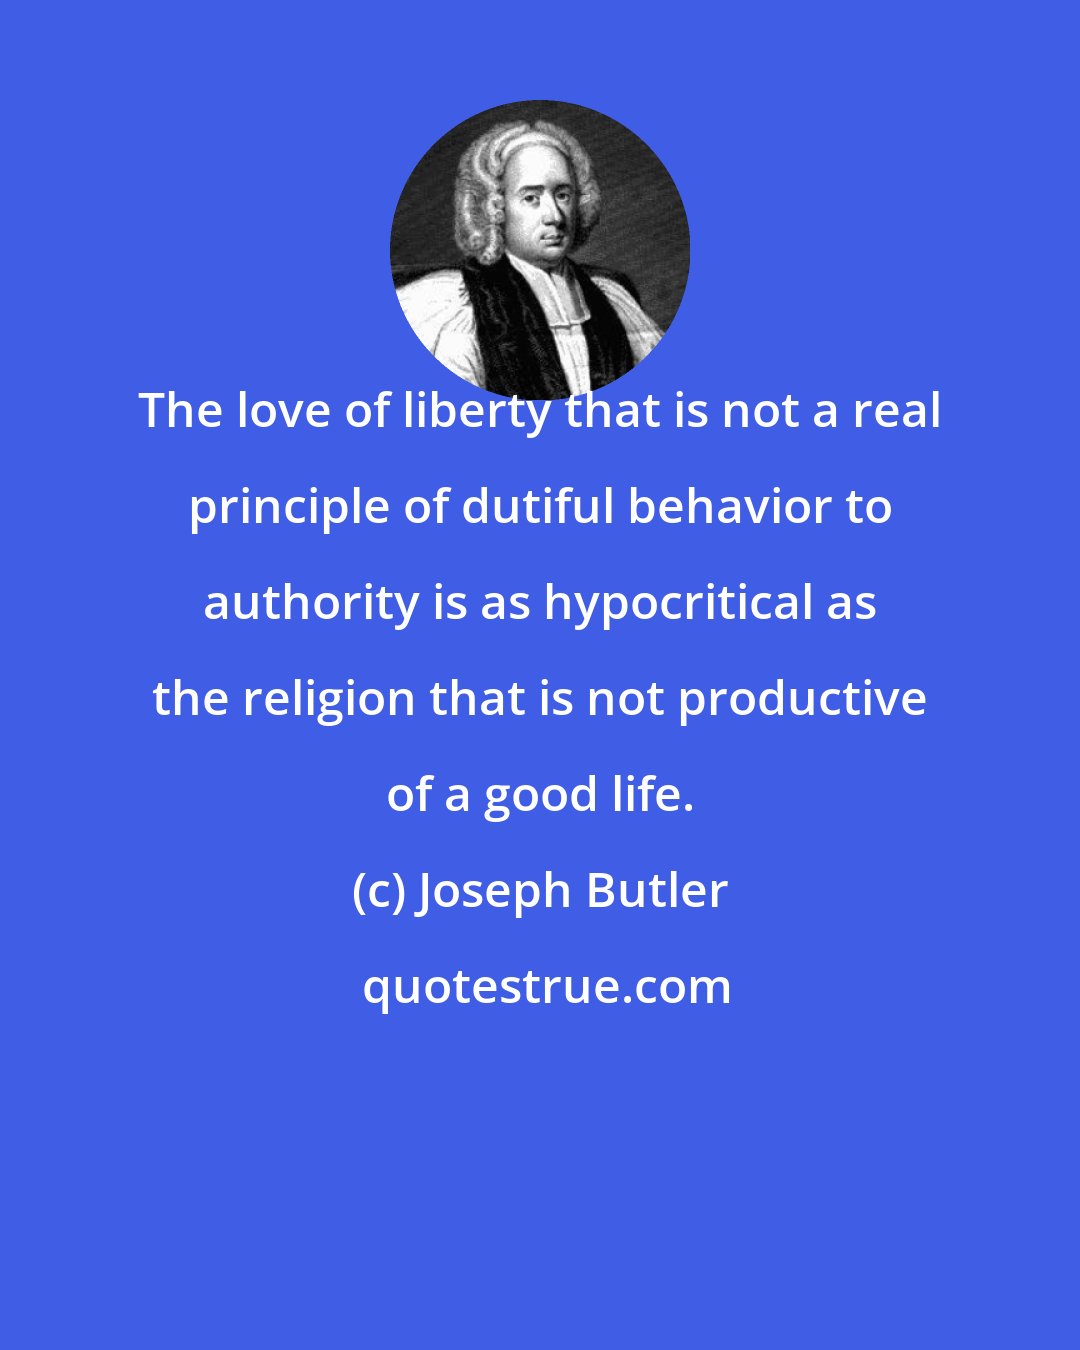 Joseph Butler: The love of liberty that is not a real principle of dutiful behavior to authority is as hypocritical as the religion that is not productive of a good life.